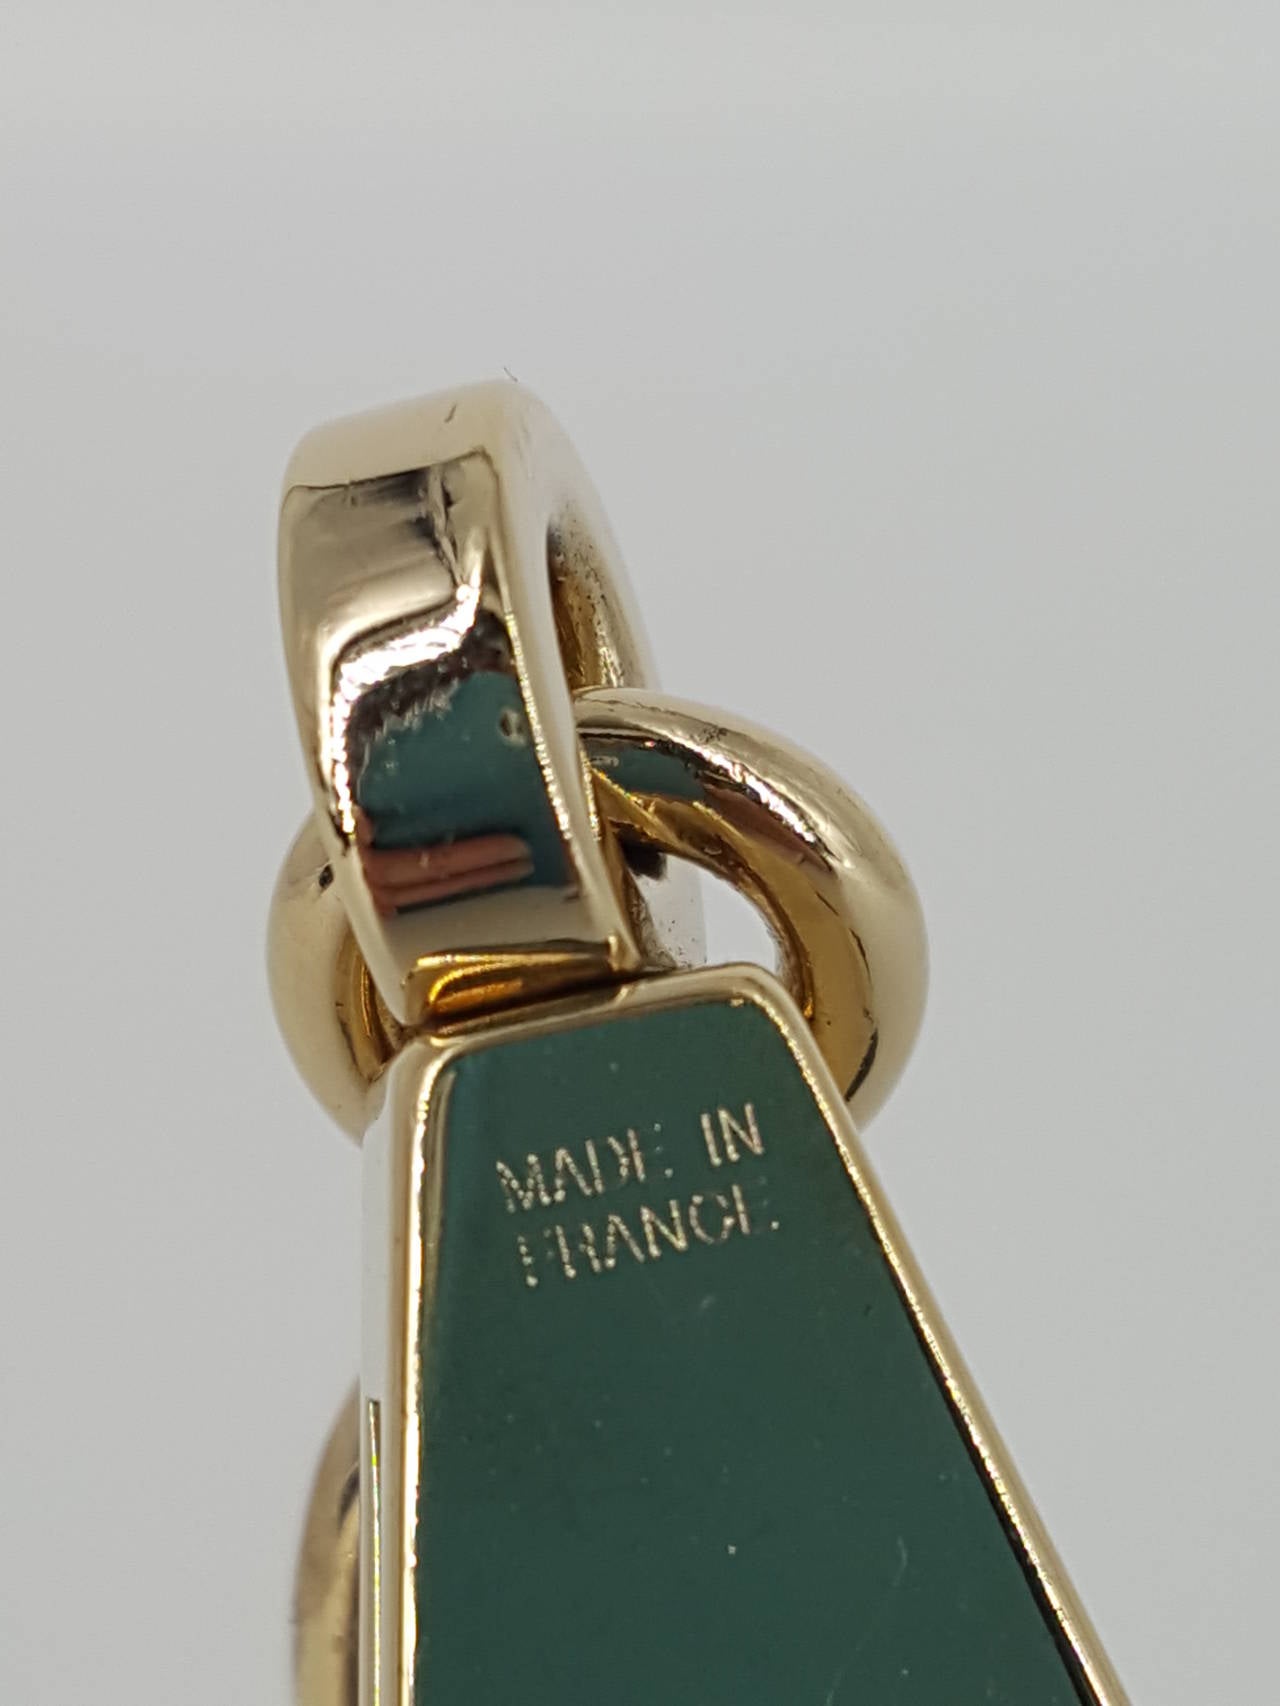 Offered for sale is this new in box Hermes Olga Charm for your Birkin or  Kelly bag.  Can also be used as a key chain.  This one is in gold tone.

Charm will ship in the original box.